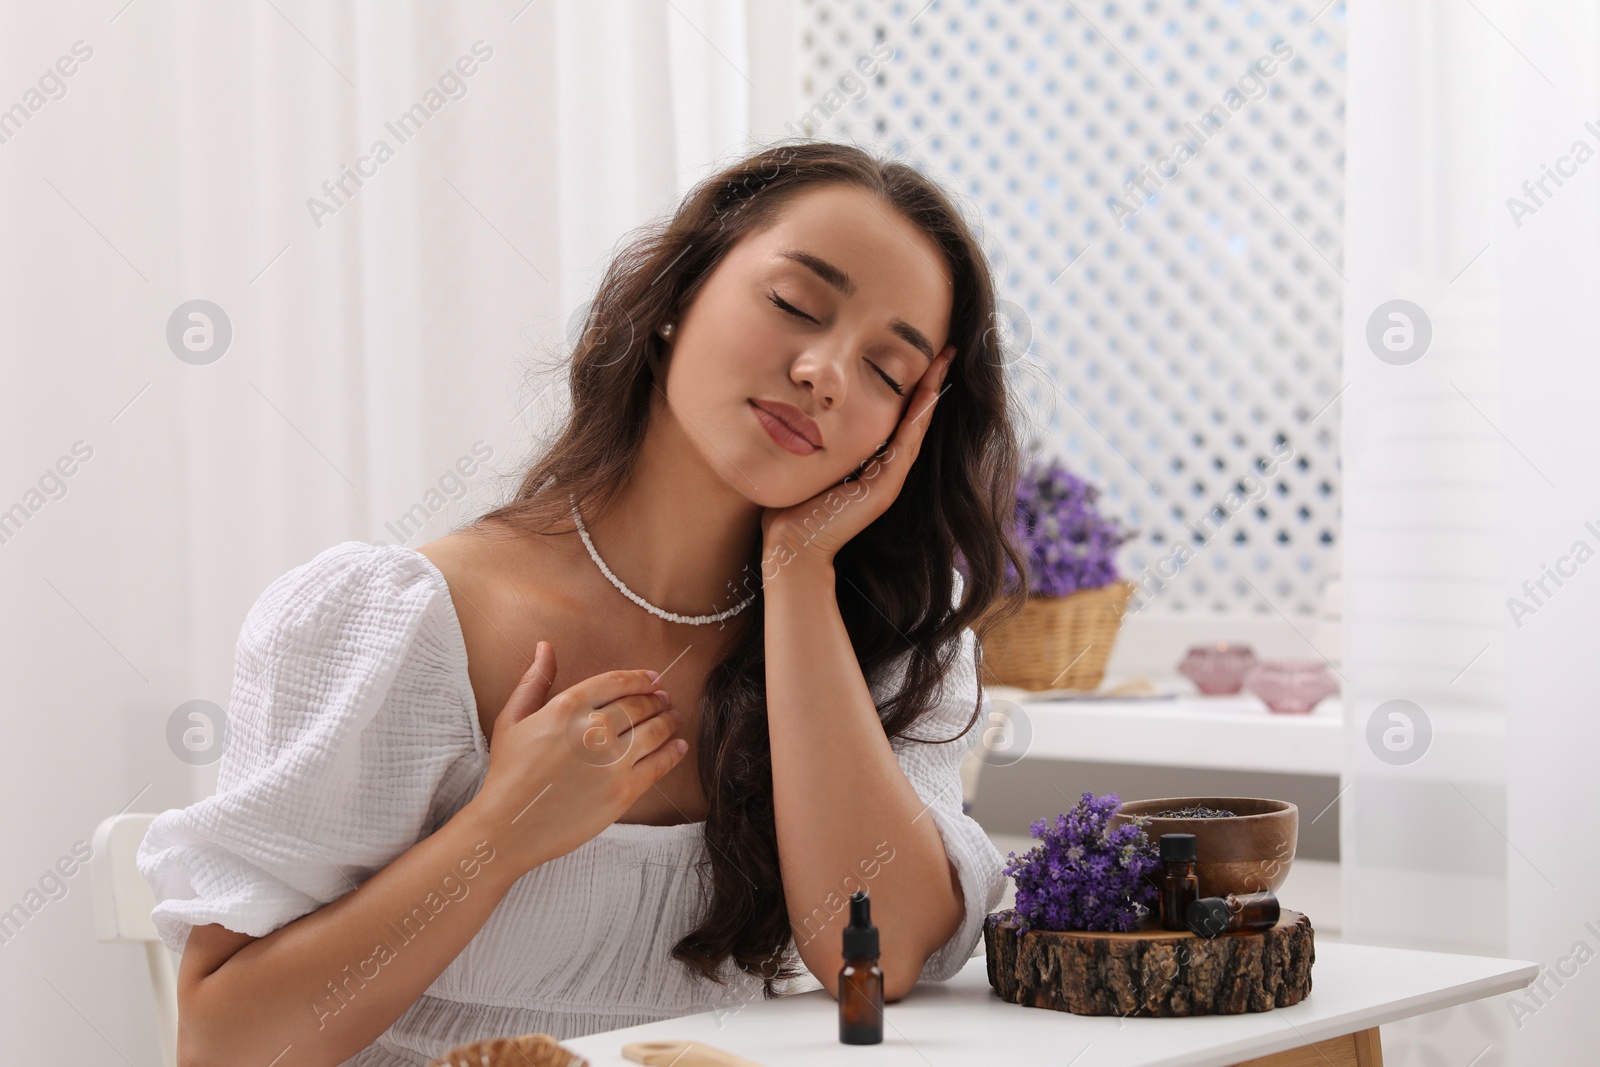 Photo of Beautiful young woman at table with bottles of essential oil and flowers indoors